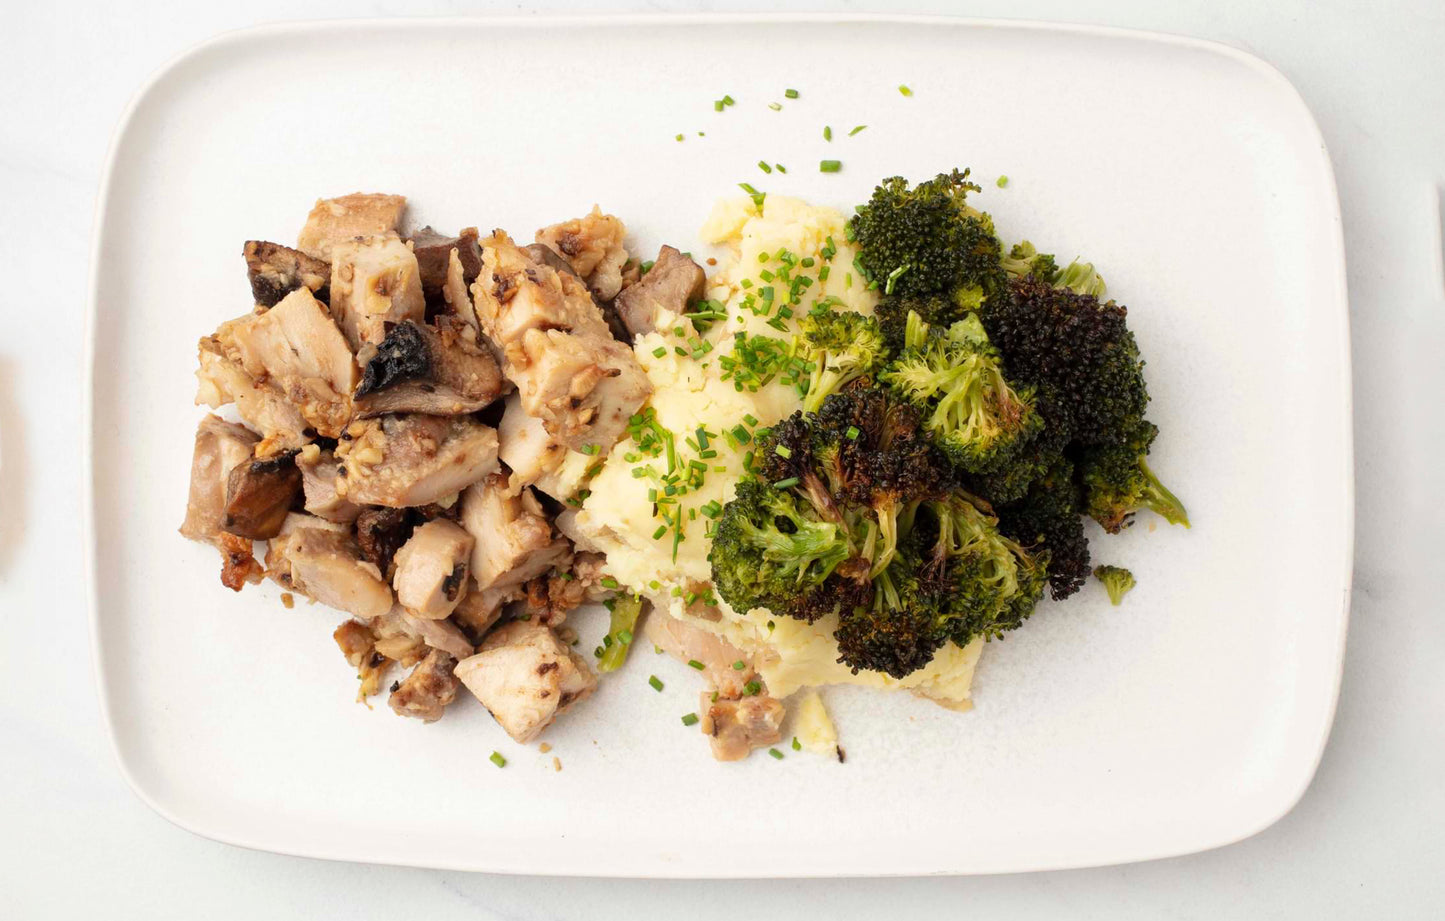 White Truffle and Portobello Chicken Thighs with Chive Mashed Potato and Broccoli